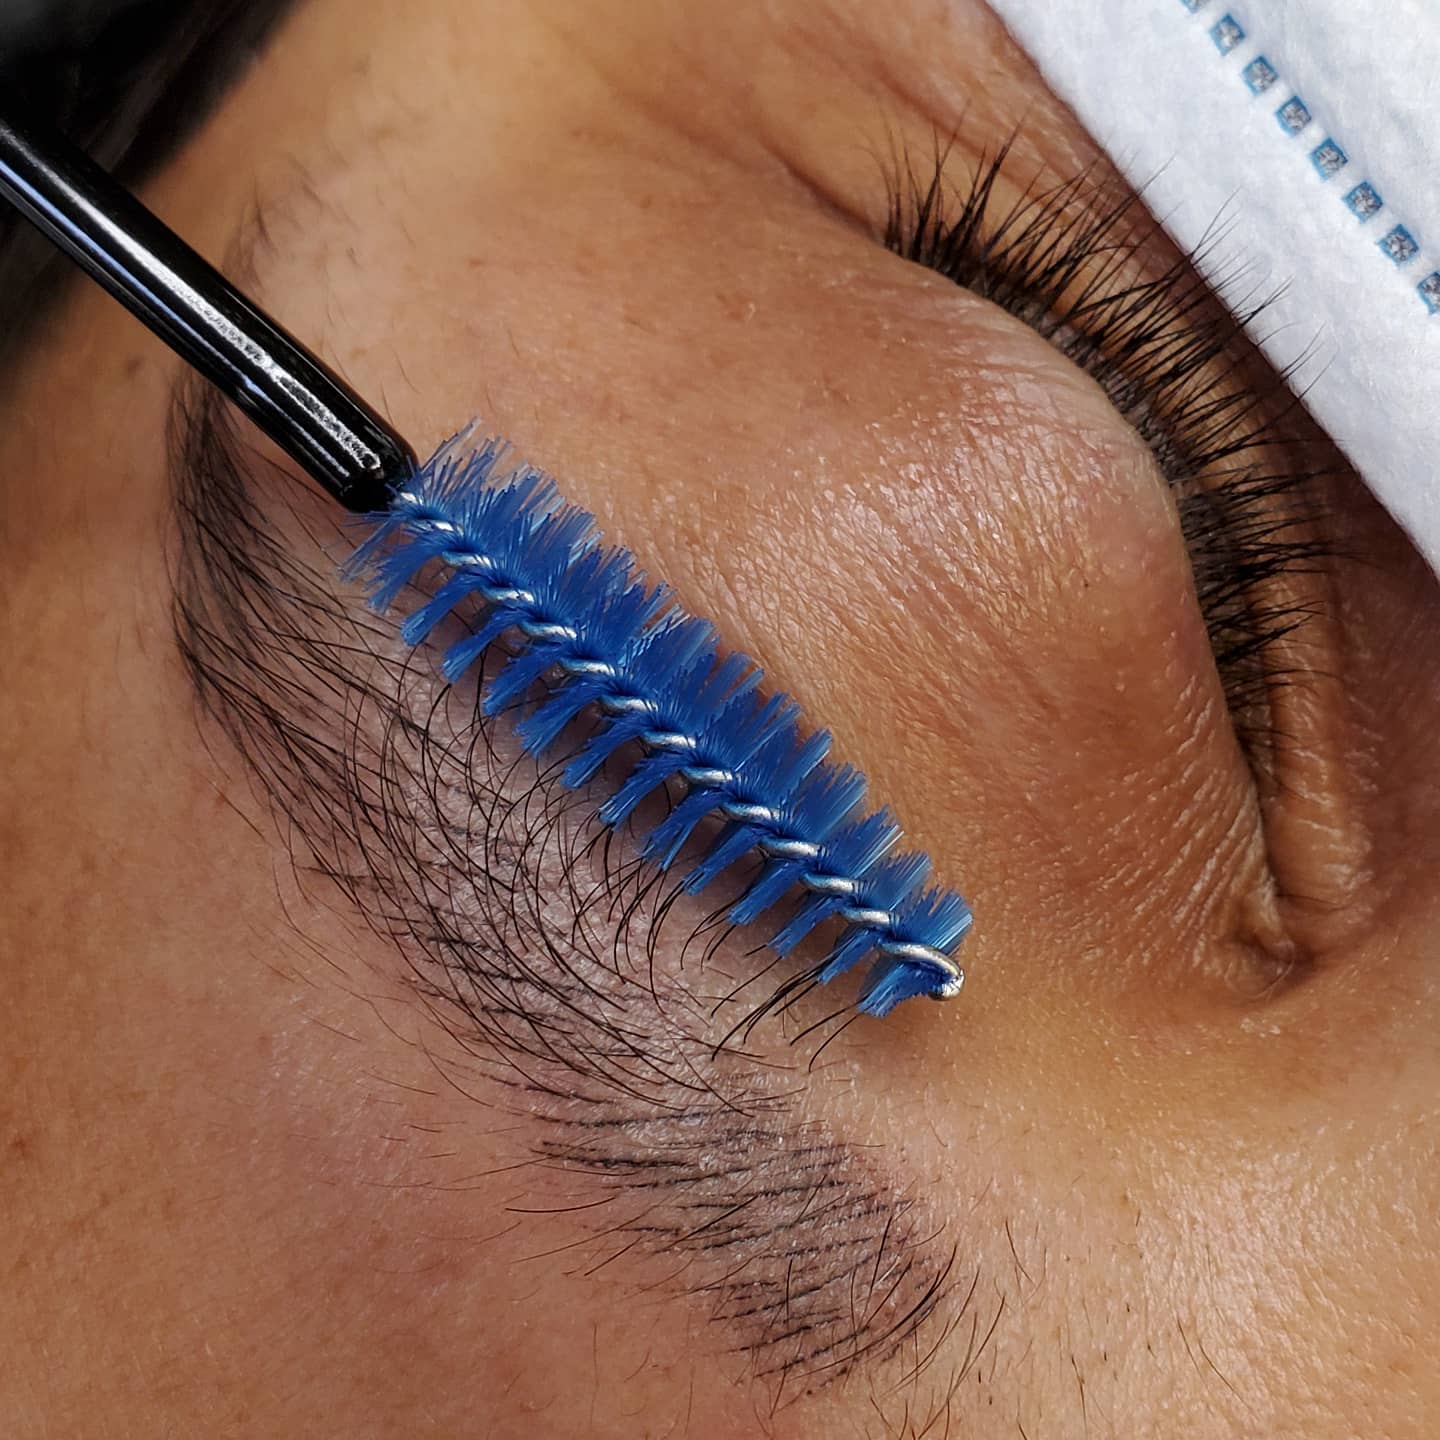 Microbladed brows with brush showing the strokes